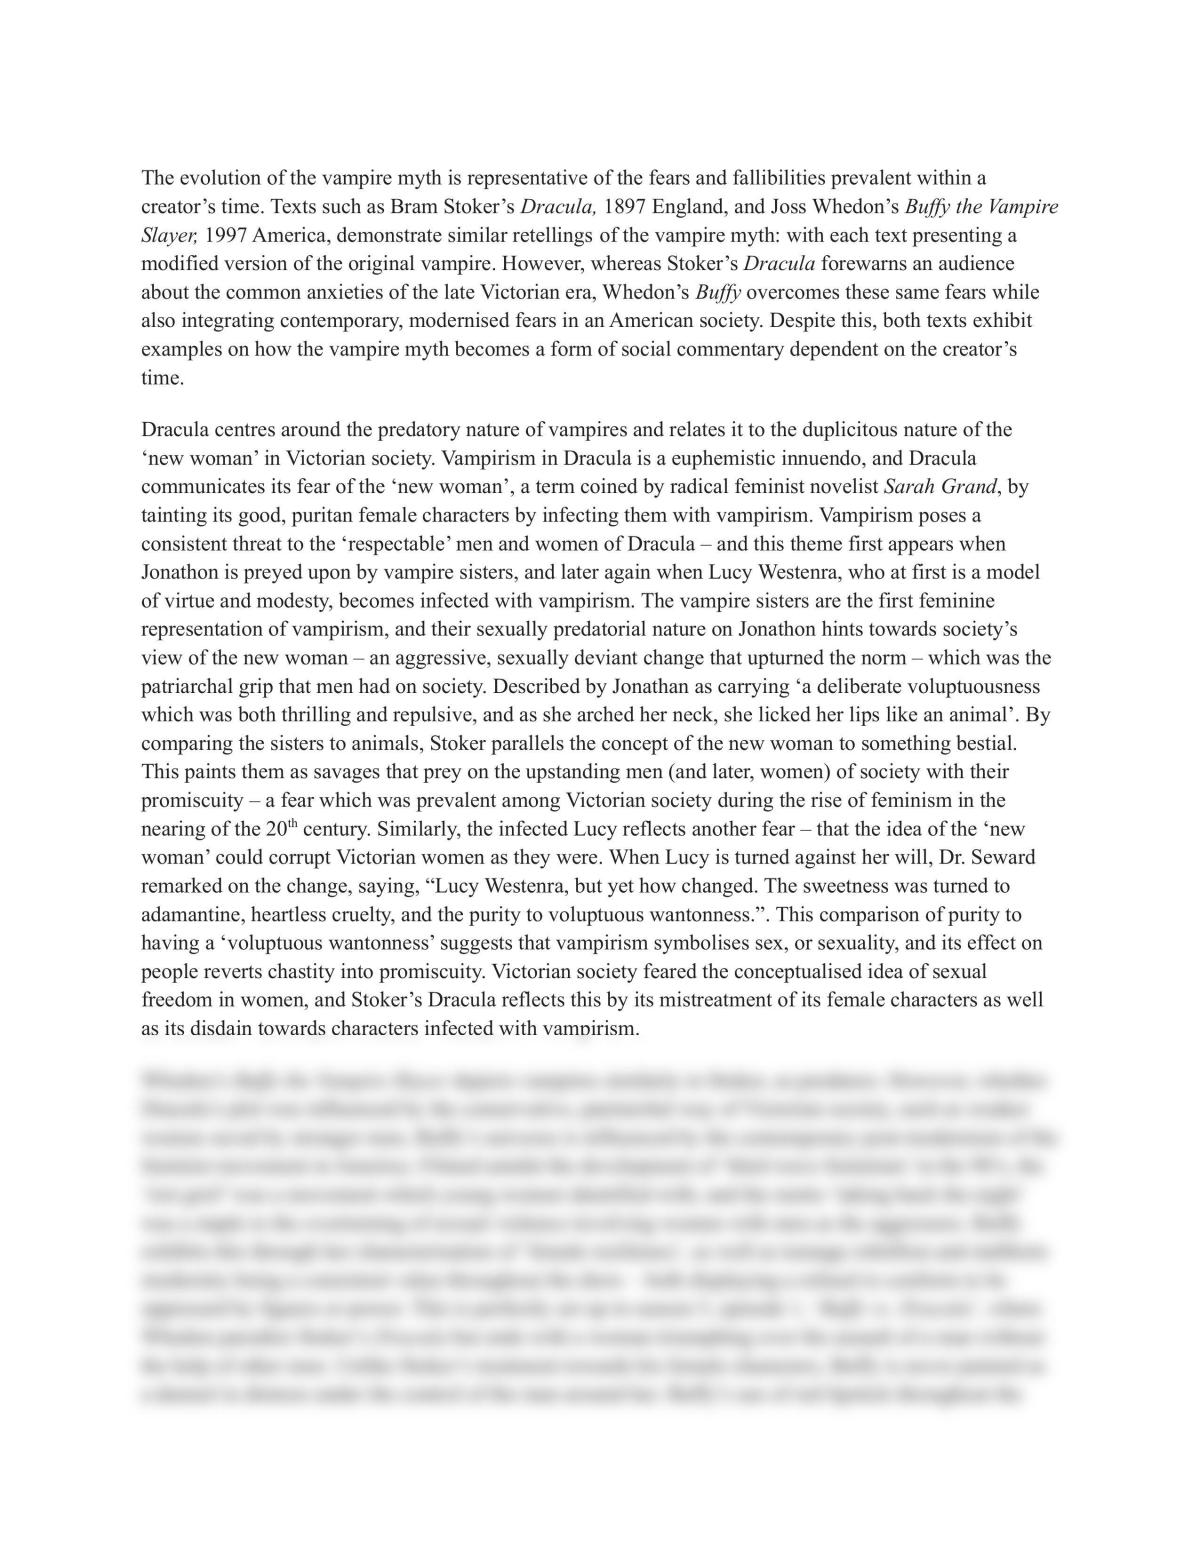 Ext 1 Buffy the vampire and Dracula essay - Page 1